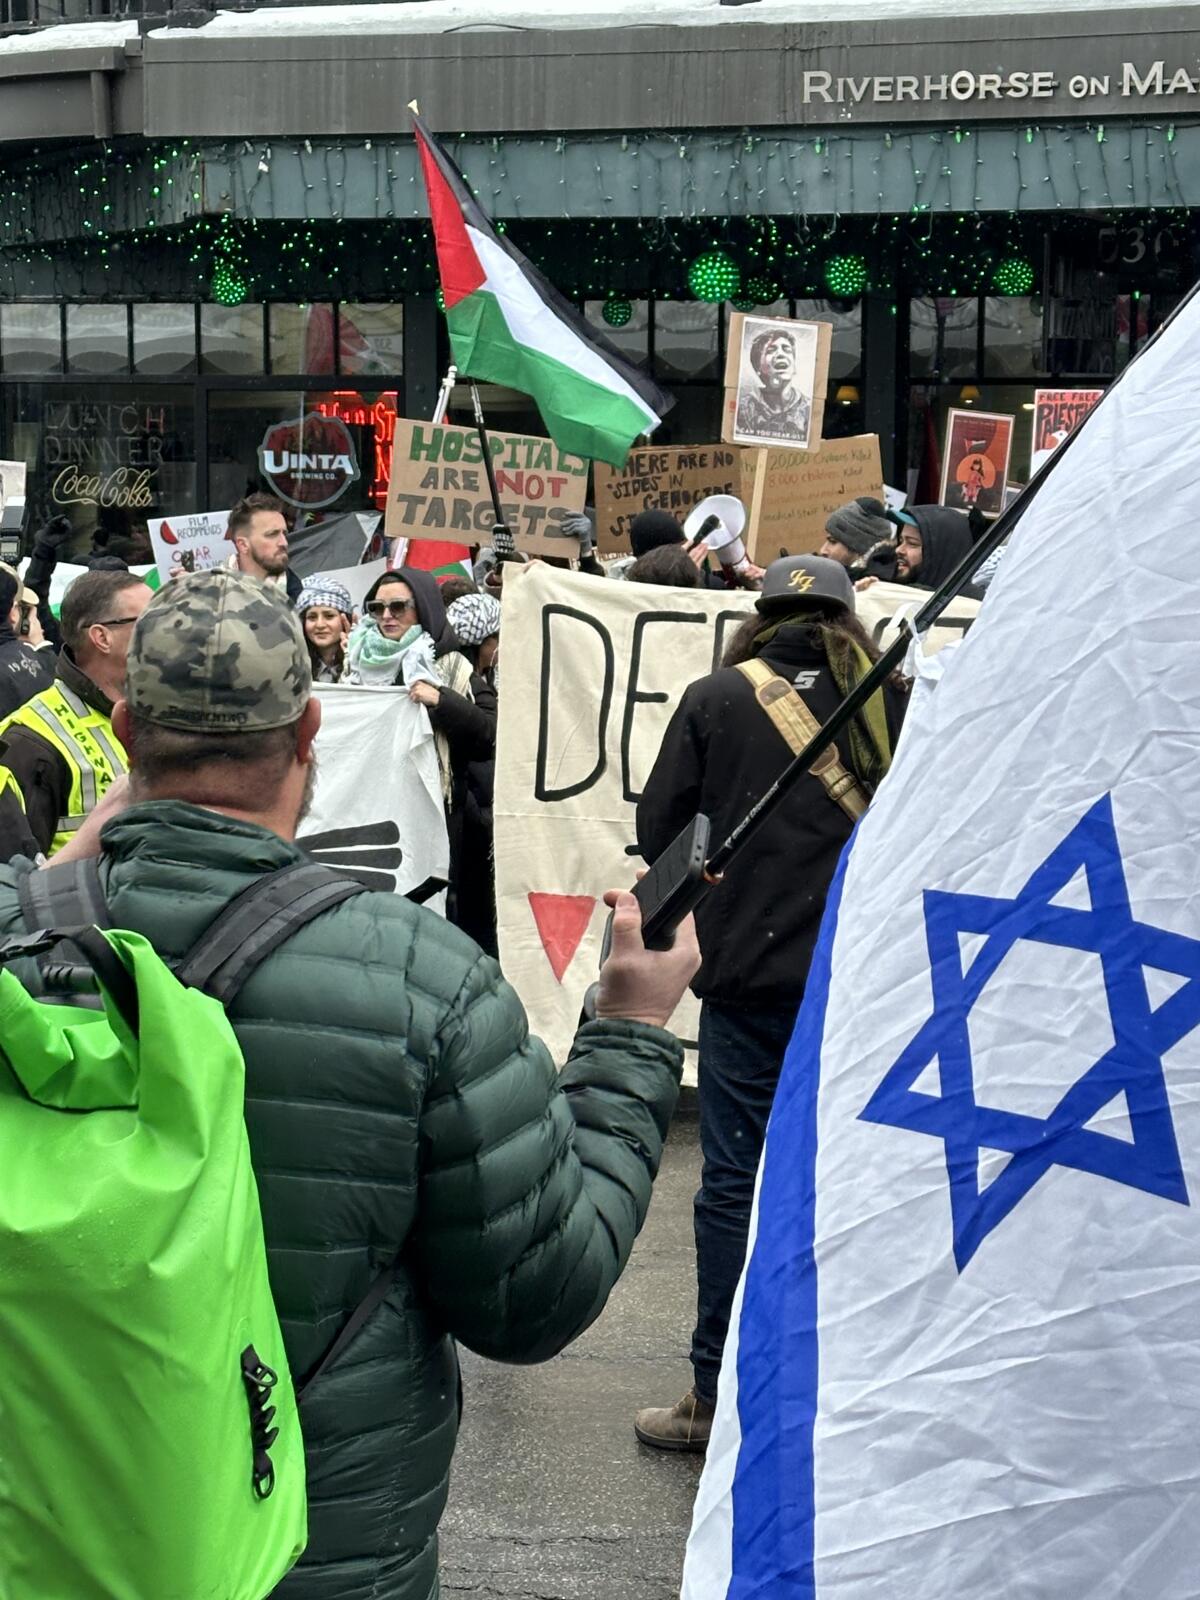 A pro-Israel counter-protester carries an Israeli flag.